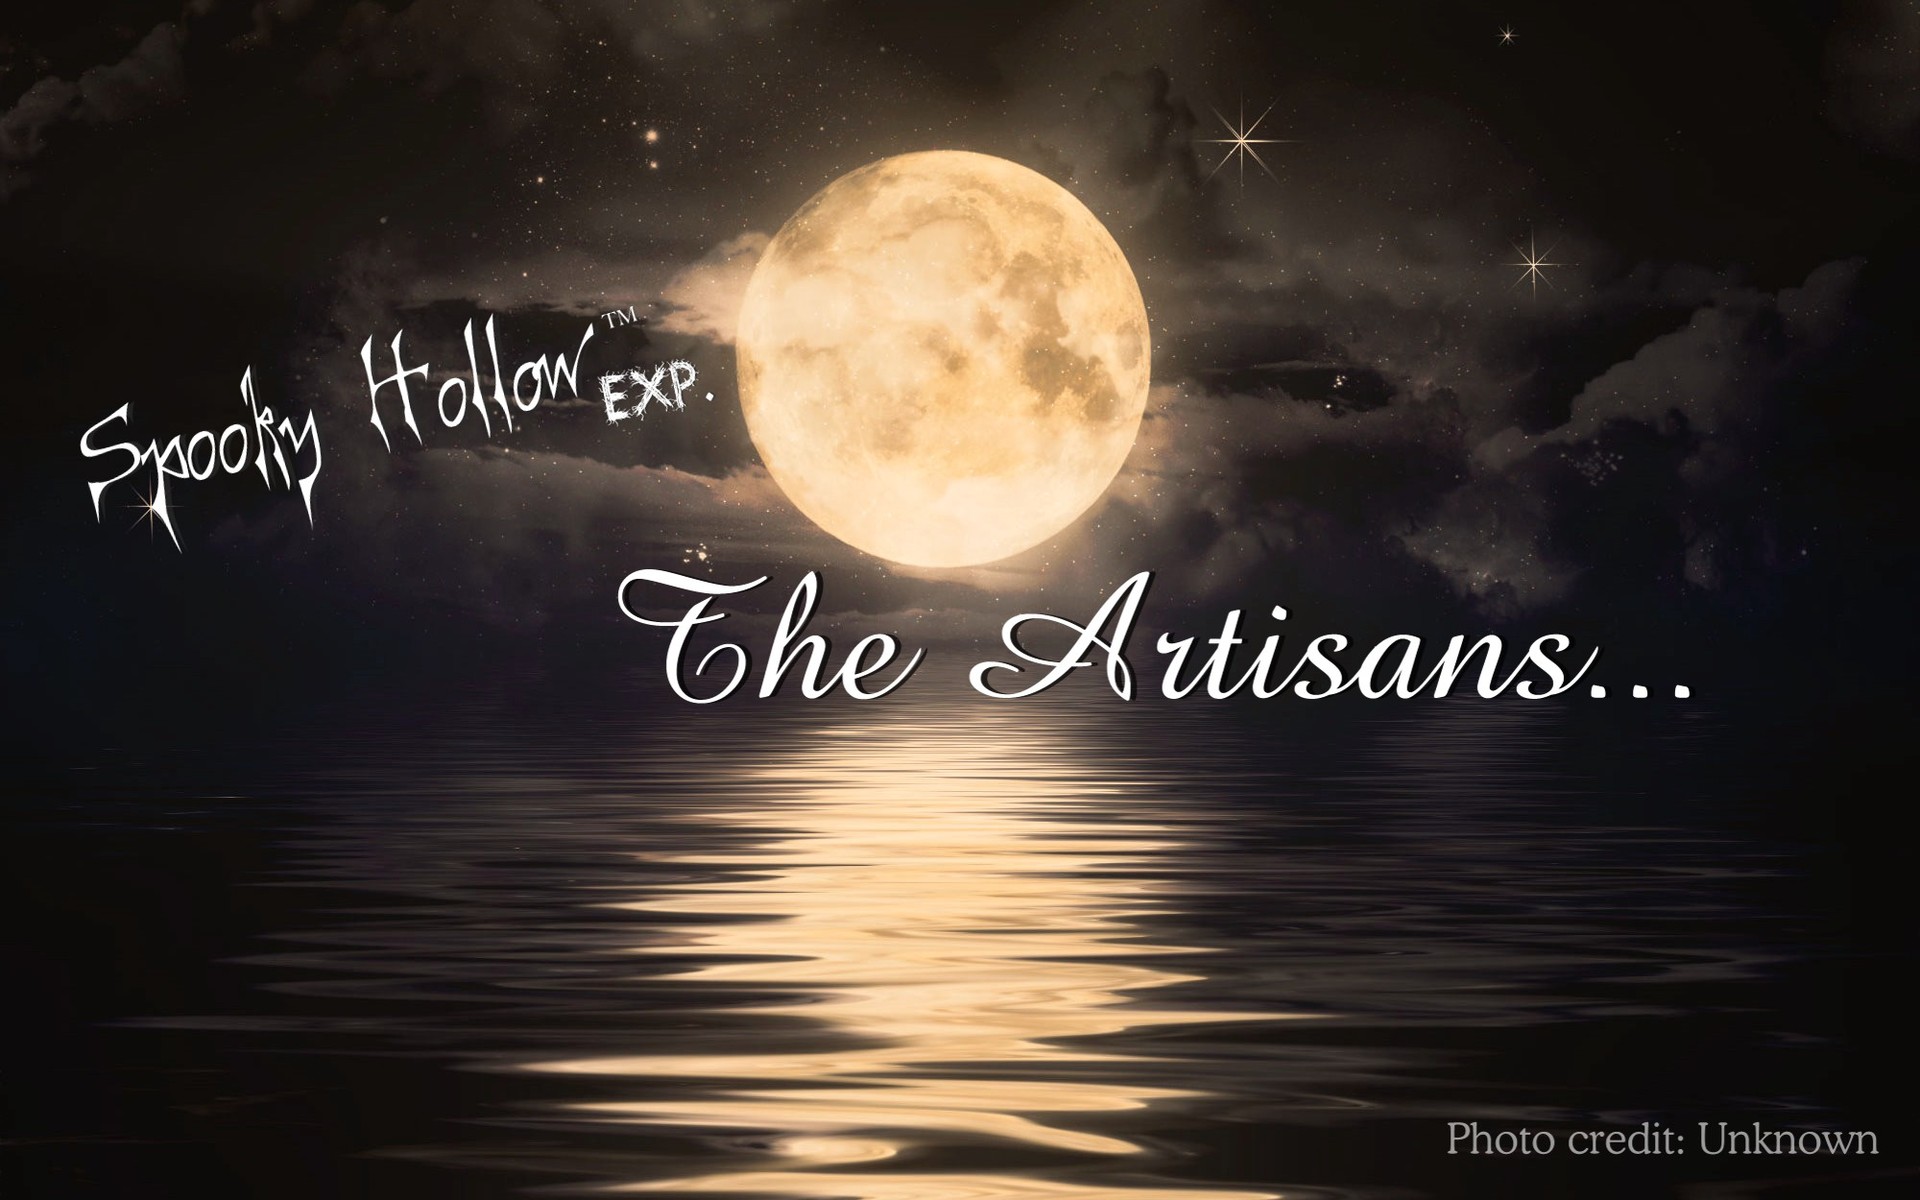 Spooky Hollow Experience The Artisans